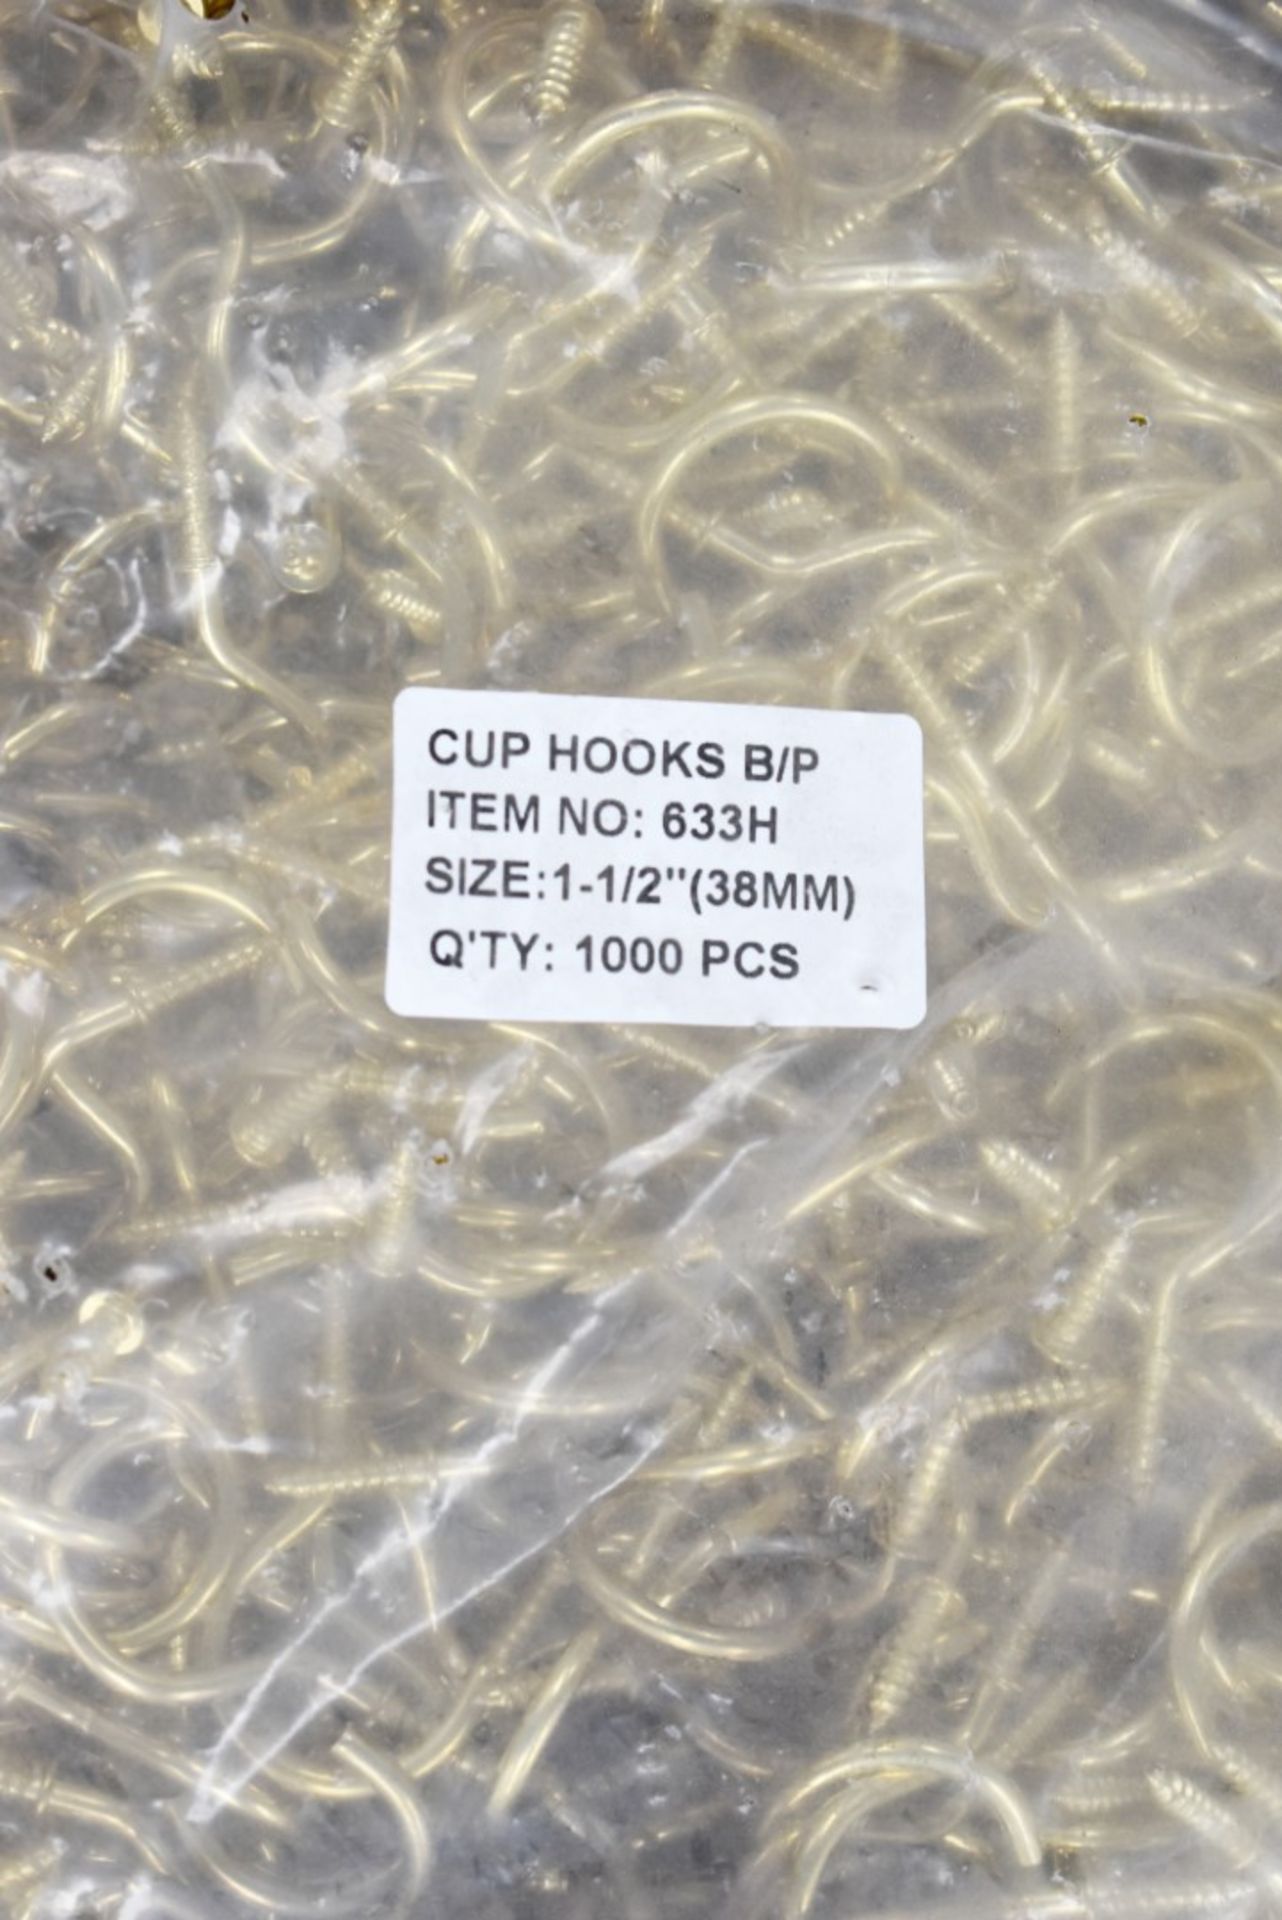 1,000 x Brass Plated Cup Screw Hooks - Product Code 633H - Size 1-1/2" 38mm - Supplied in 1 Bag of - Image 2 of 3